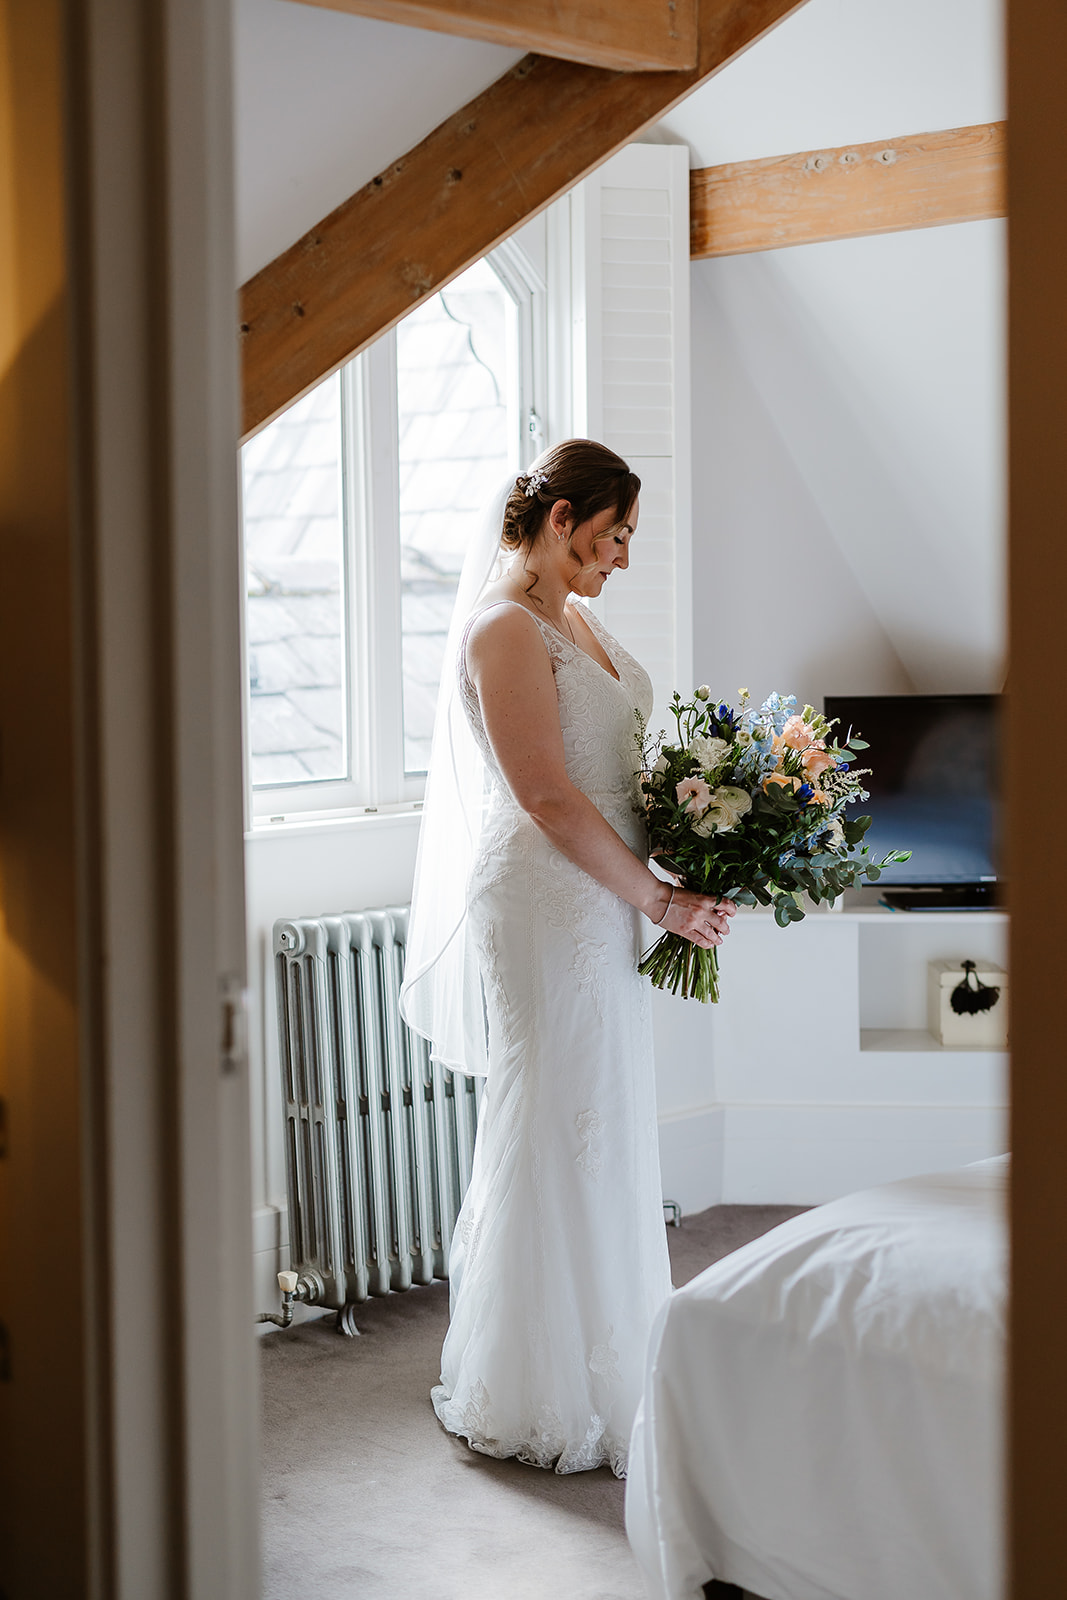 Bride posing with bouquet by window